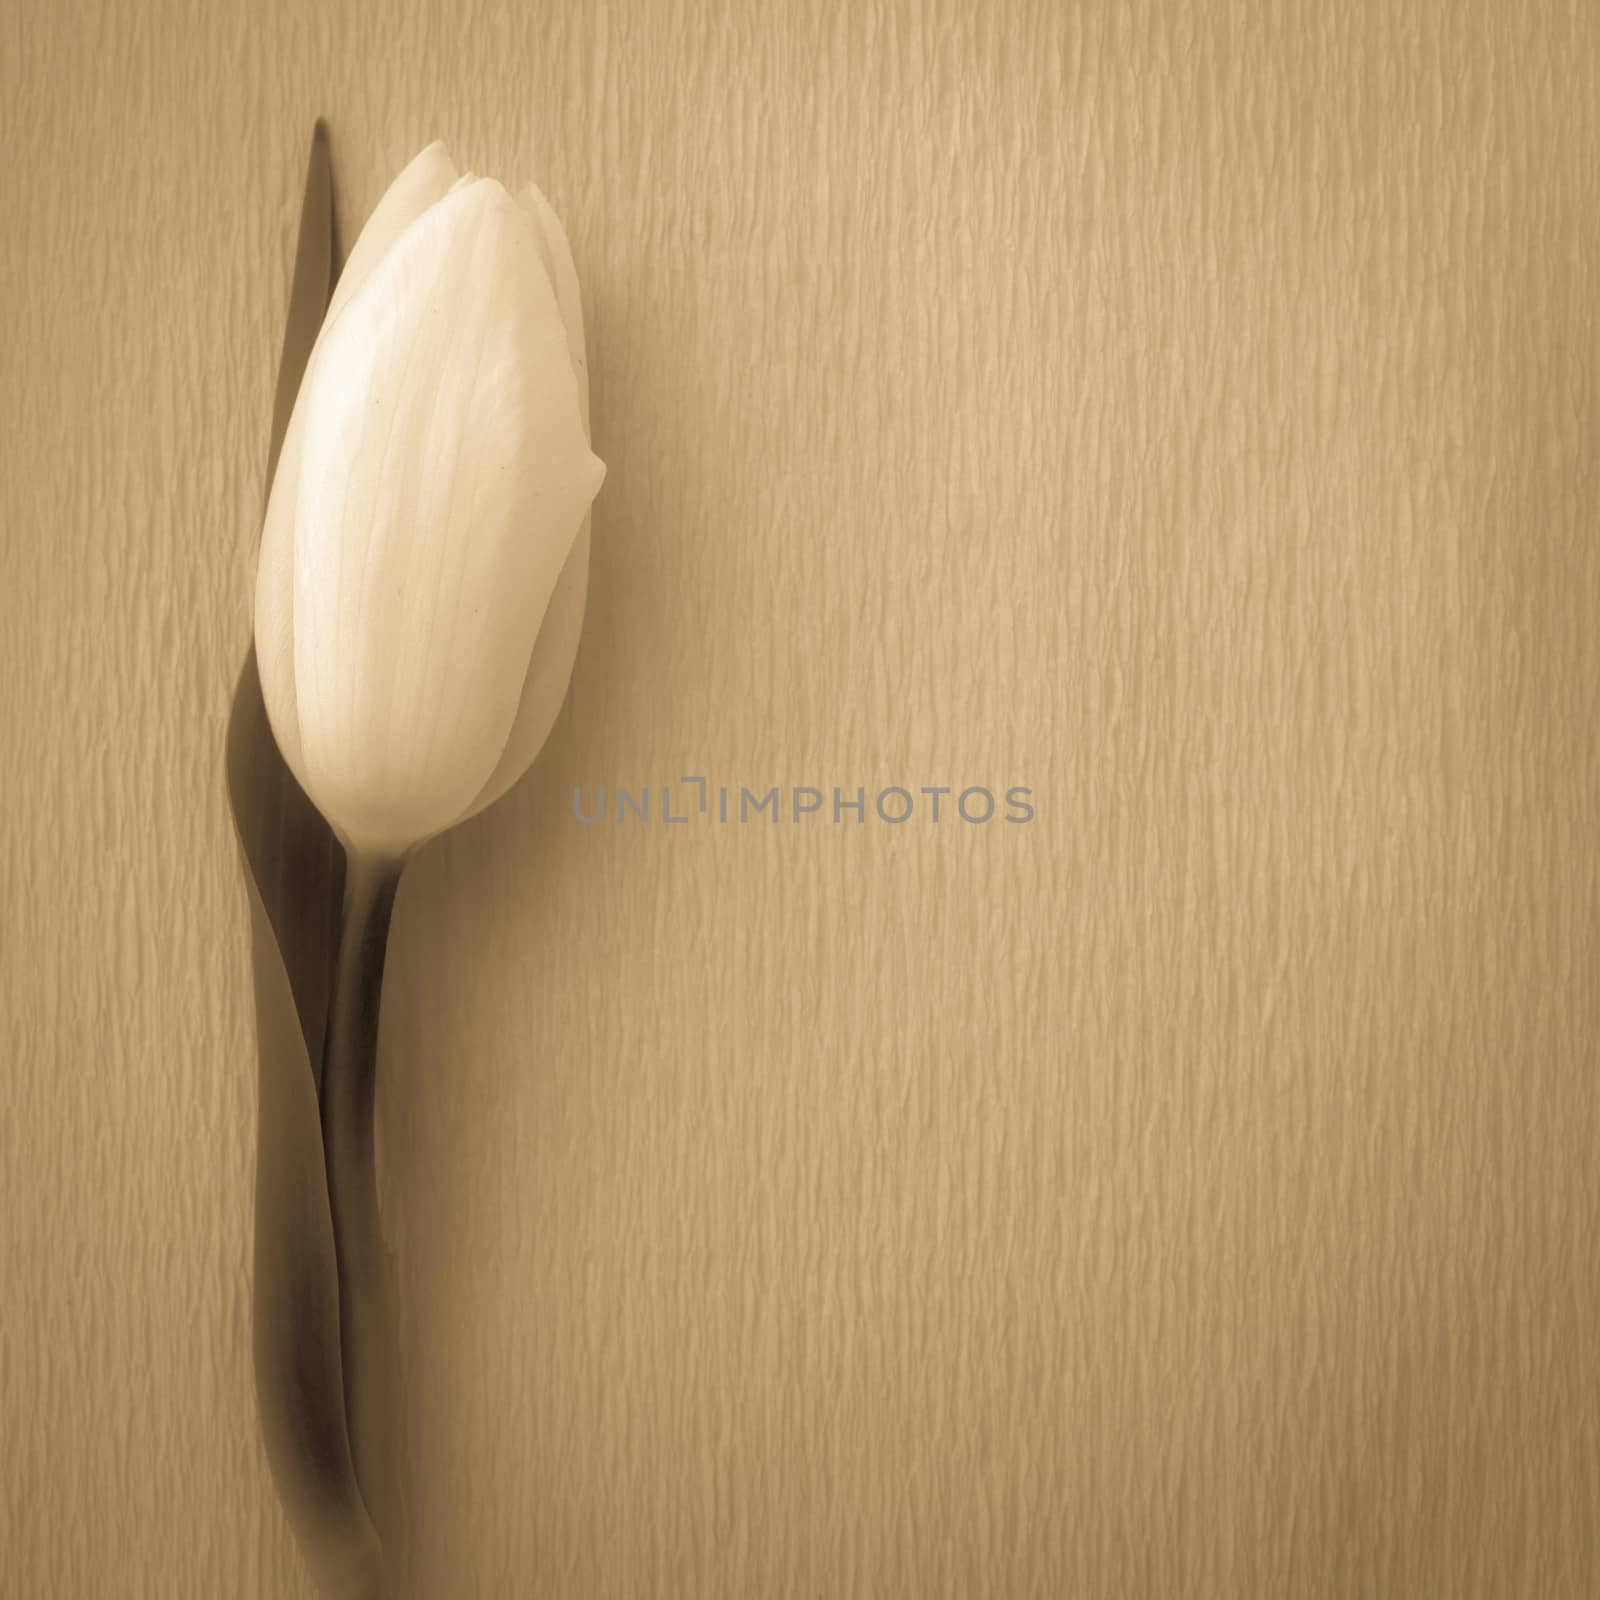 White tulip resting on textured background in sepia tone